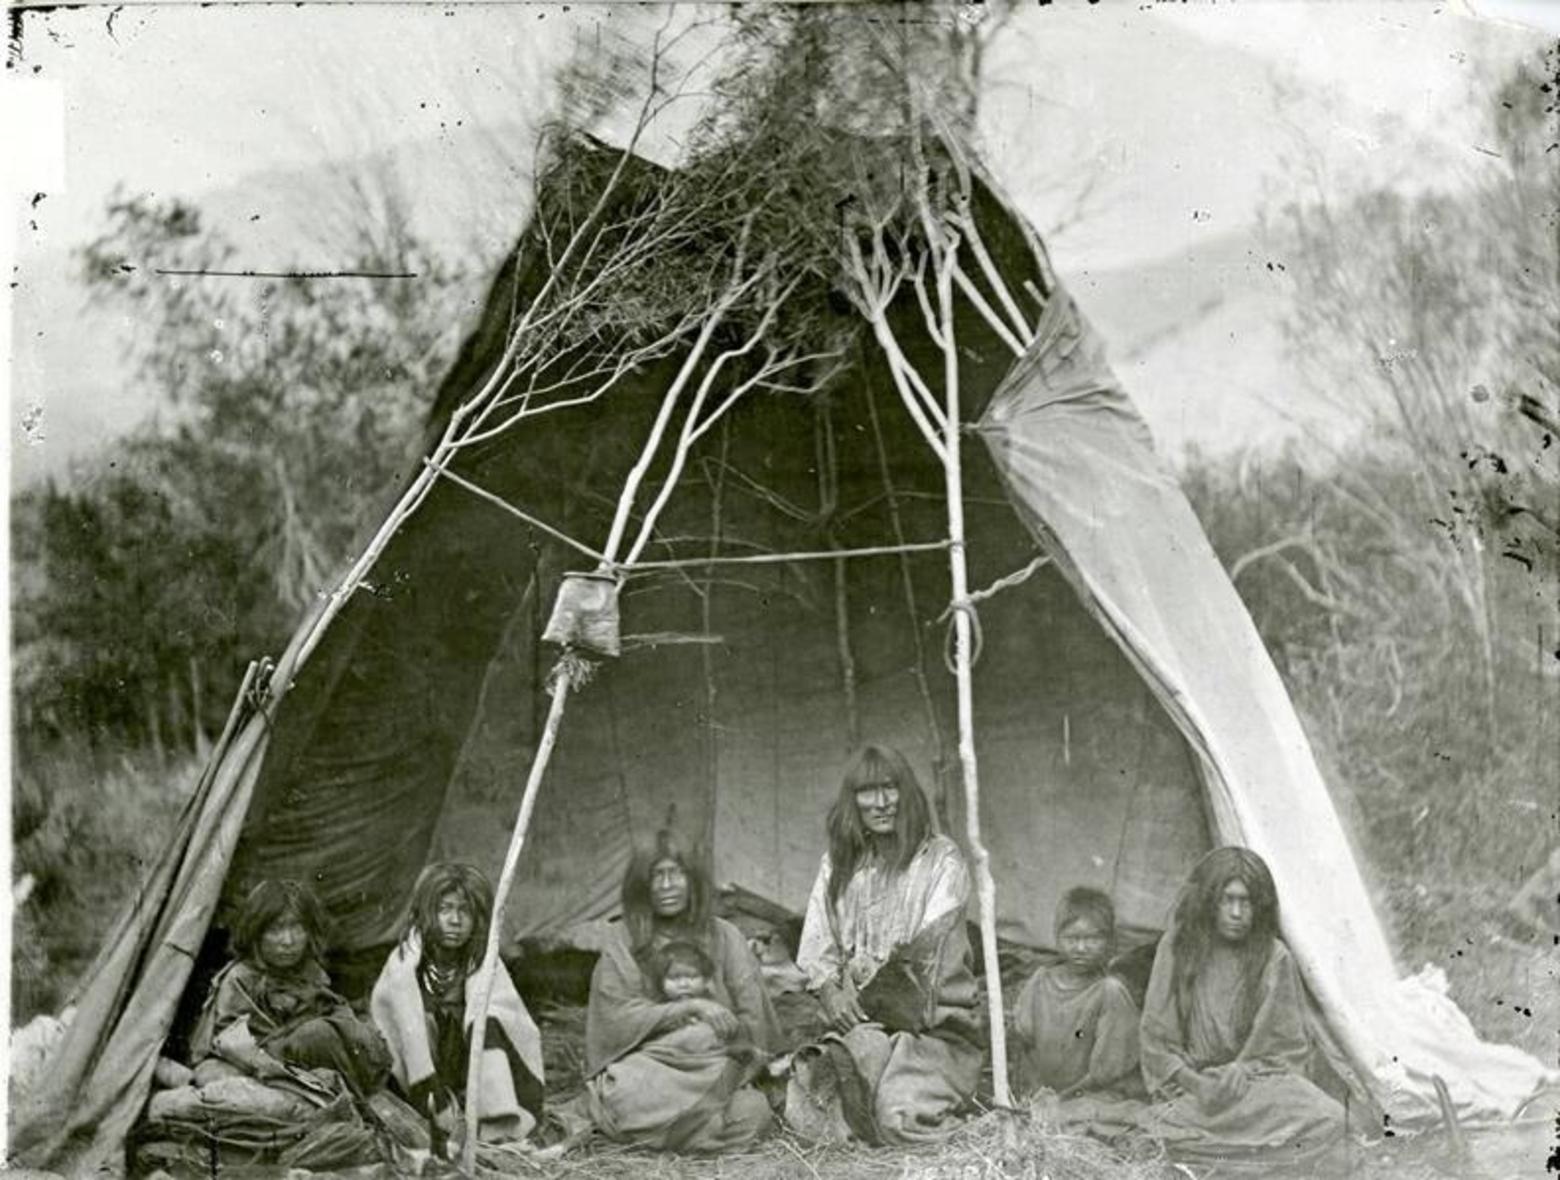 A family of Sheepeater Mountain Shoshone (Tukudika) west of Yellowstone in 1871. This photo was taken by William Henry Jackson at Medicine Lodge Creek in Idaho. In 1879, Yellowstone superintendent Philetus Norris sent the Tukudika to the Wind River Reservation in Wyoming. Photo courtesy NPS